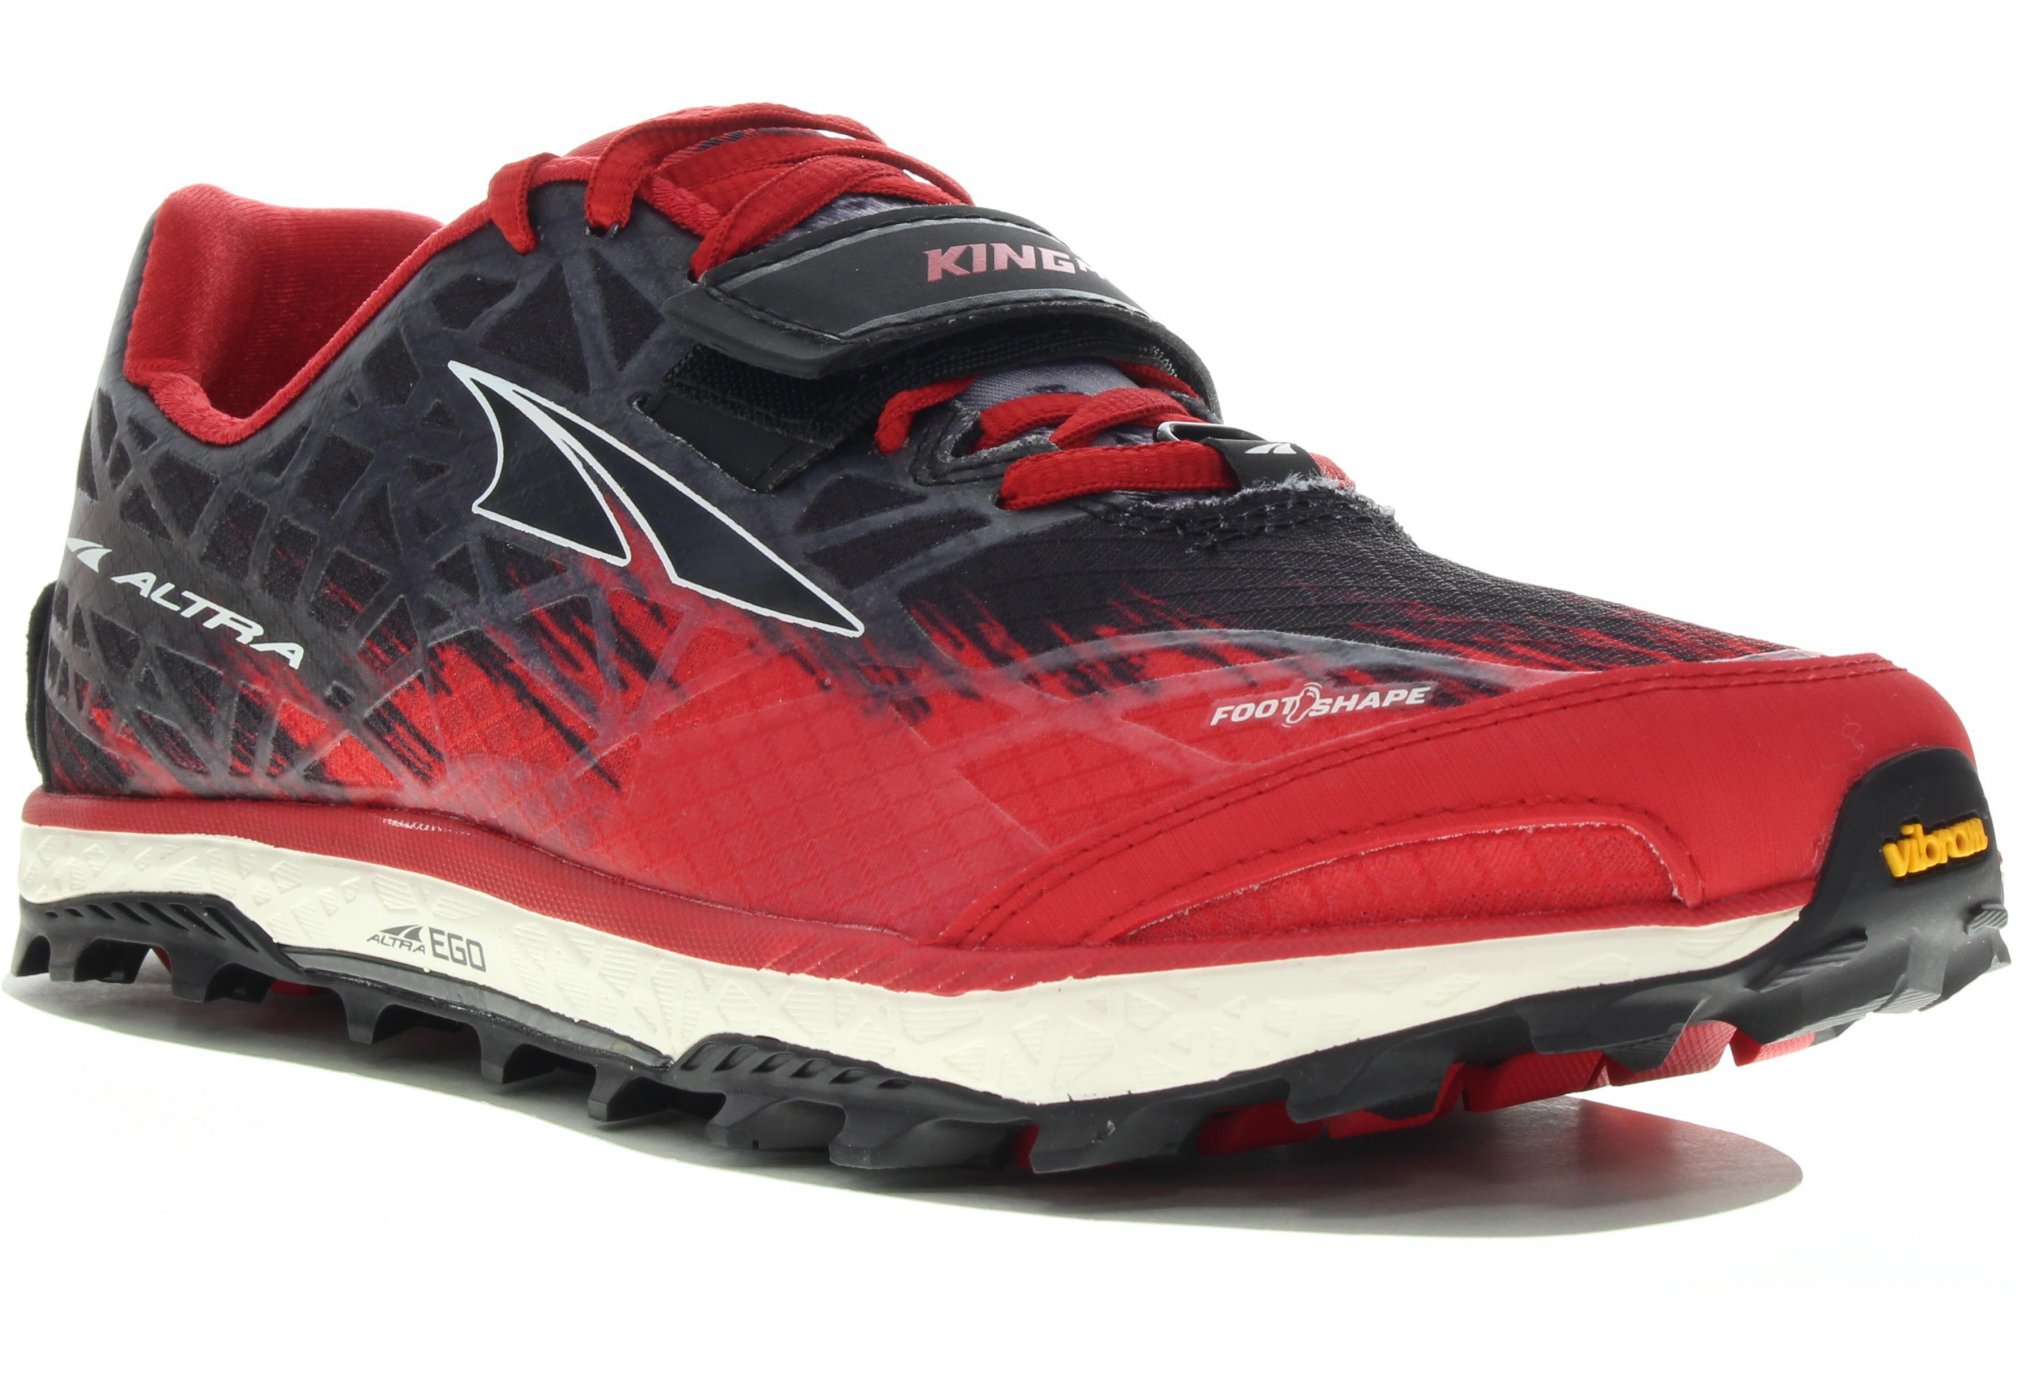 Altra King mt 1.5 m chaussures homme